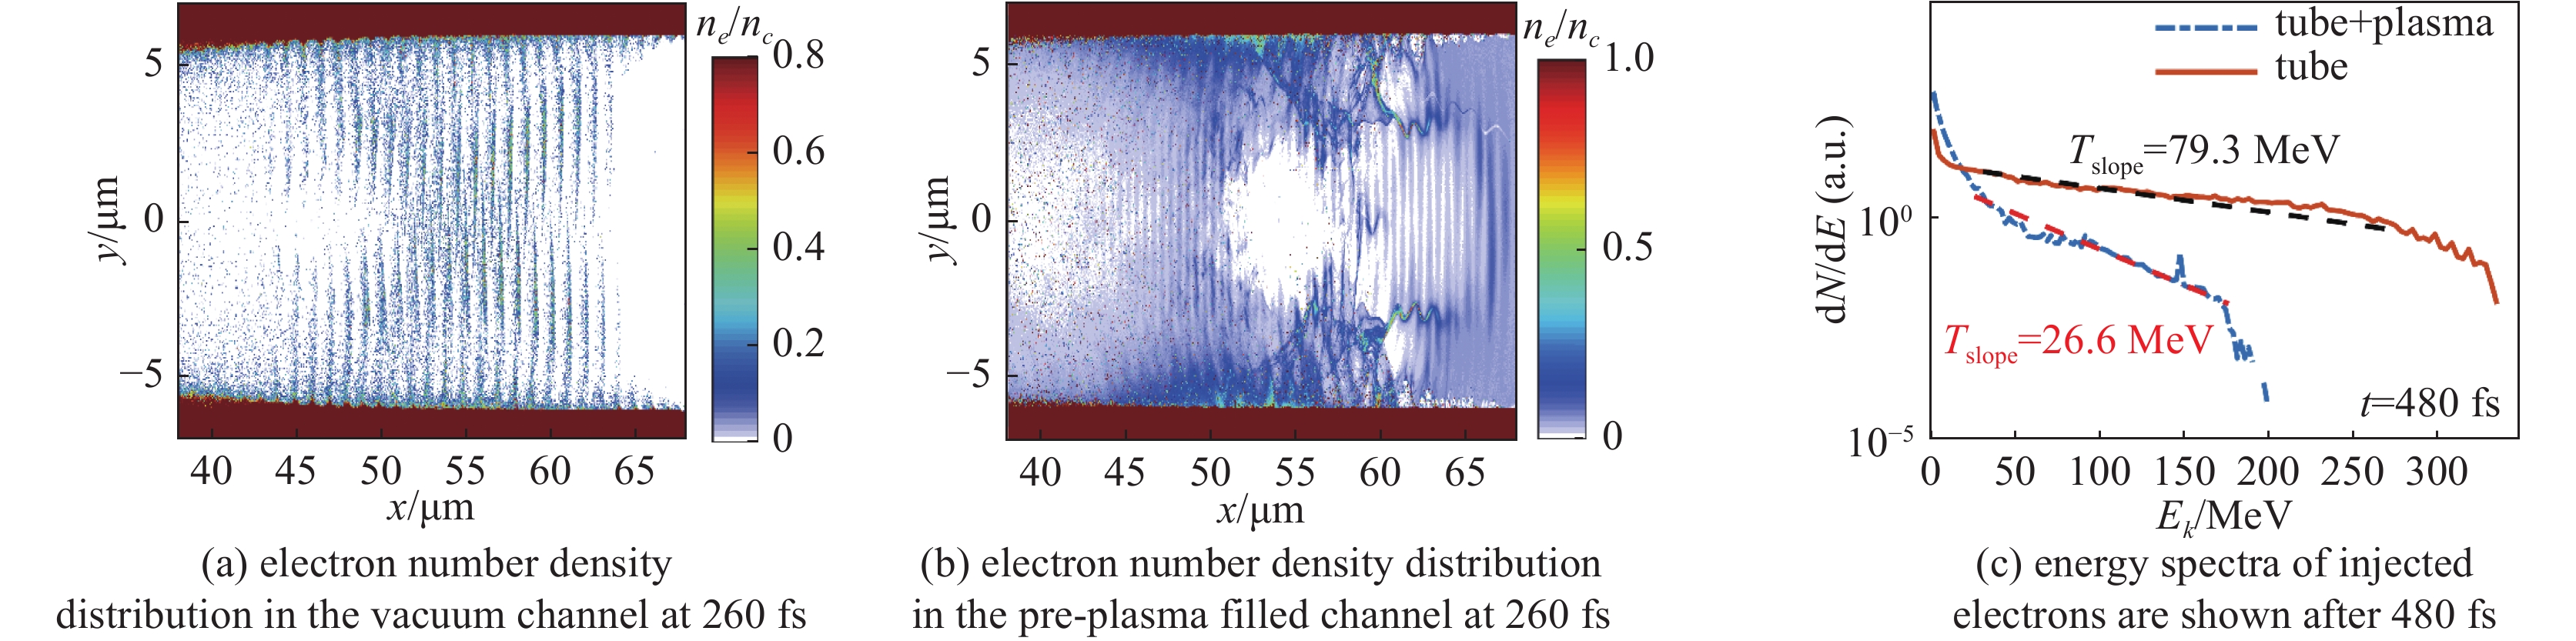 Electron number density and electron spectral distribution